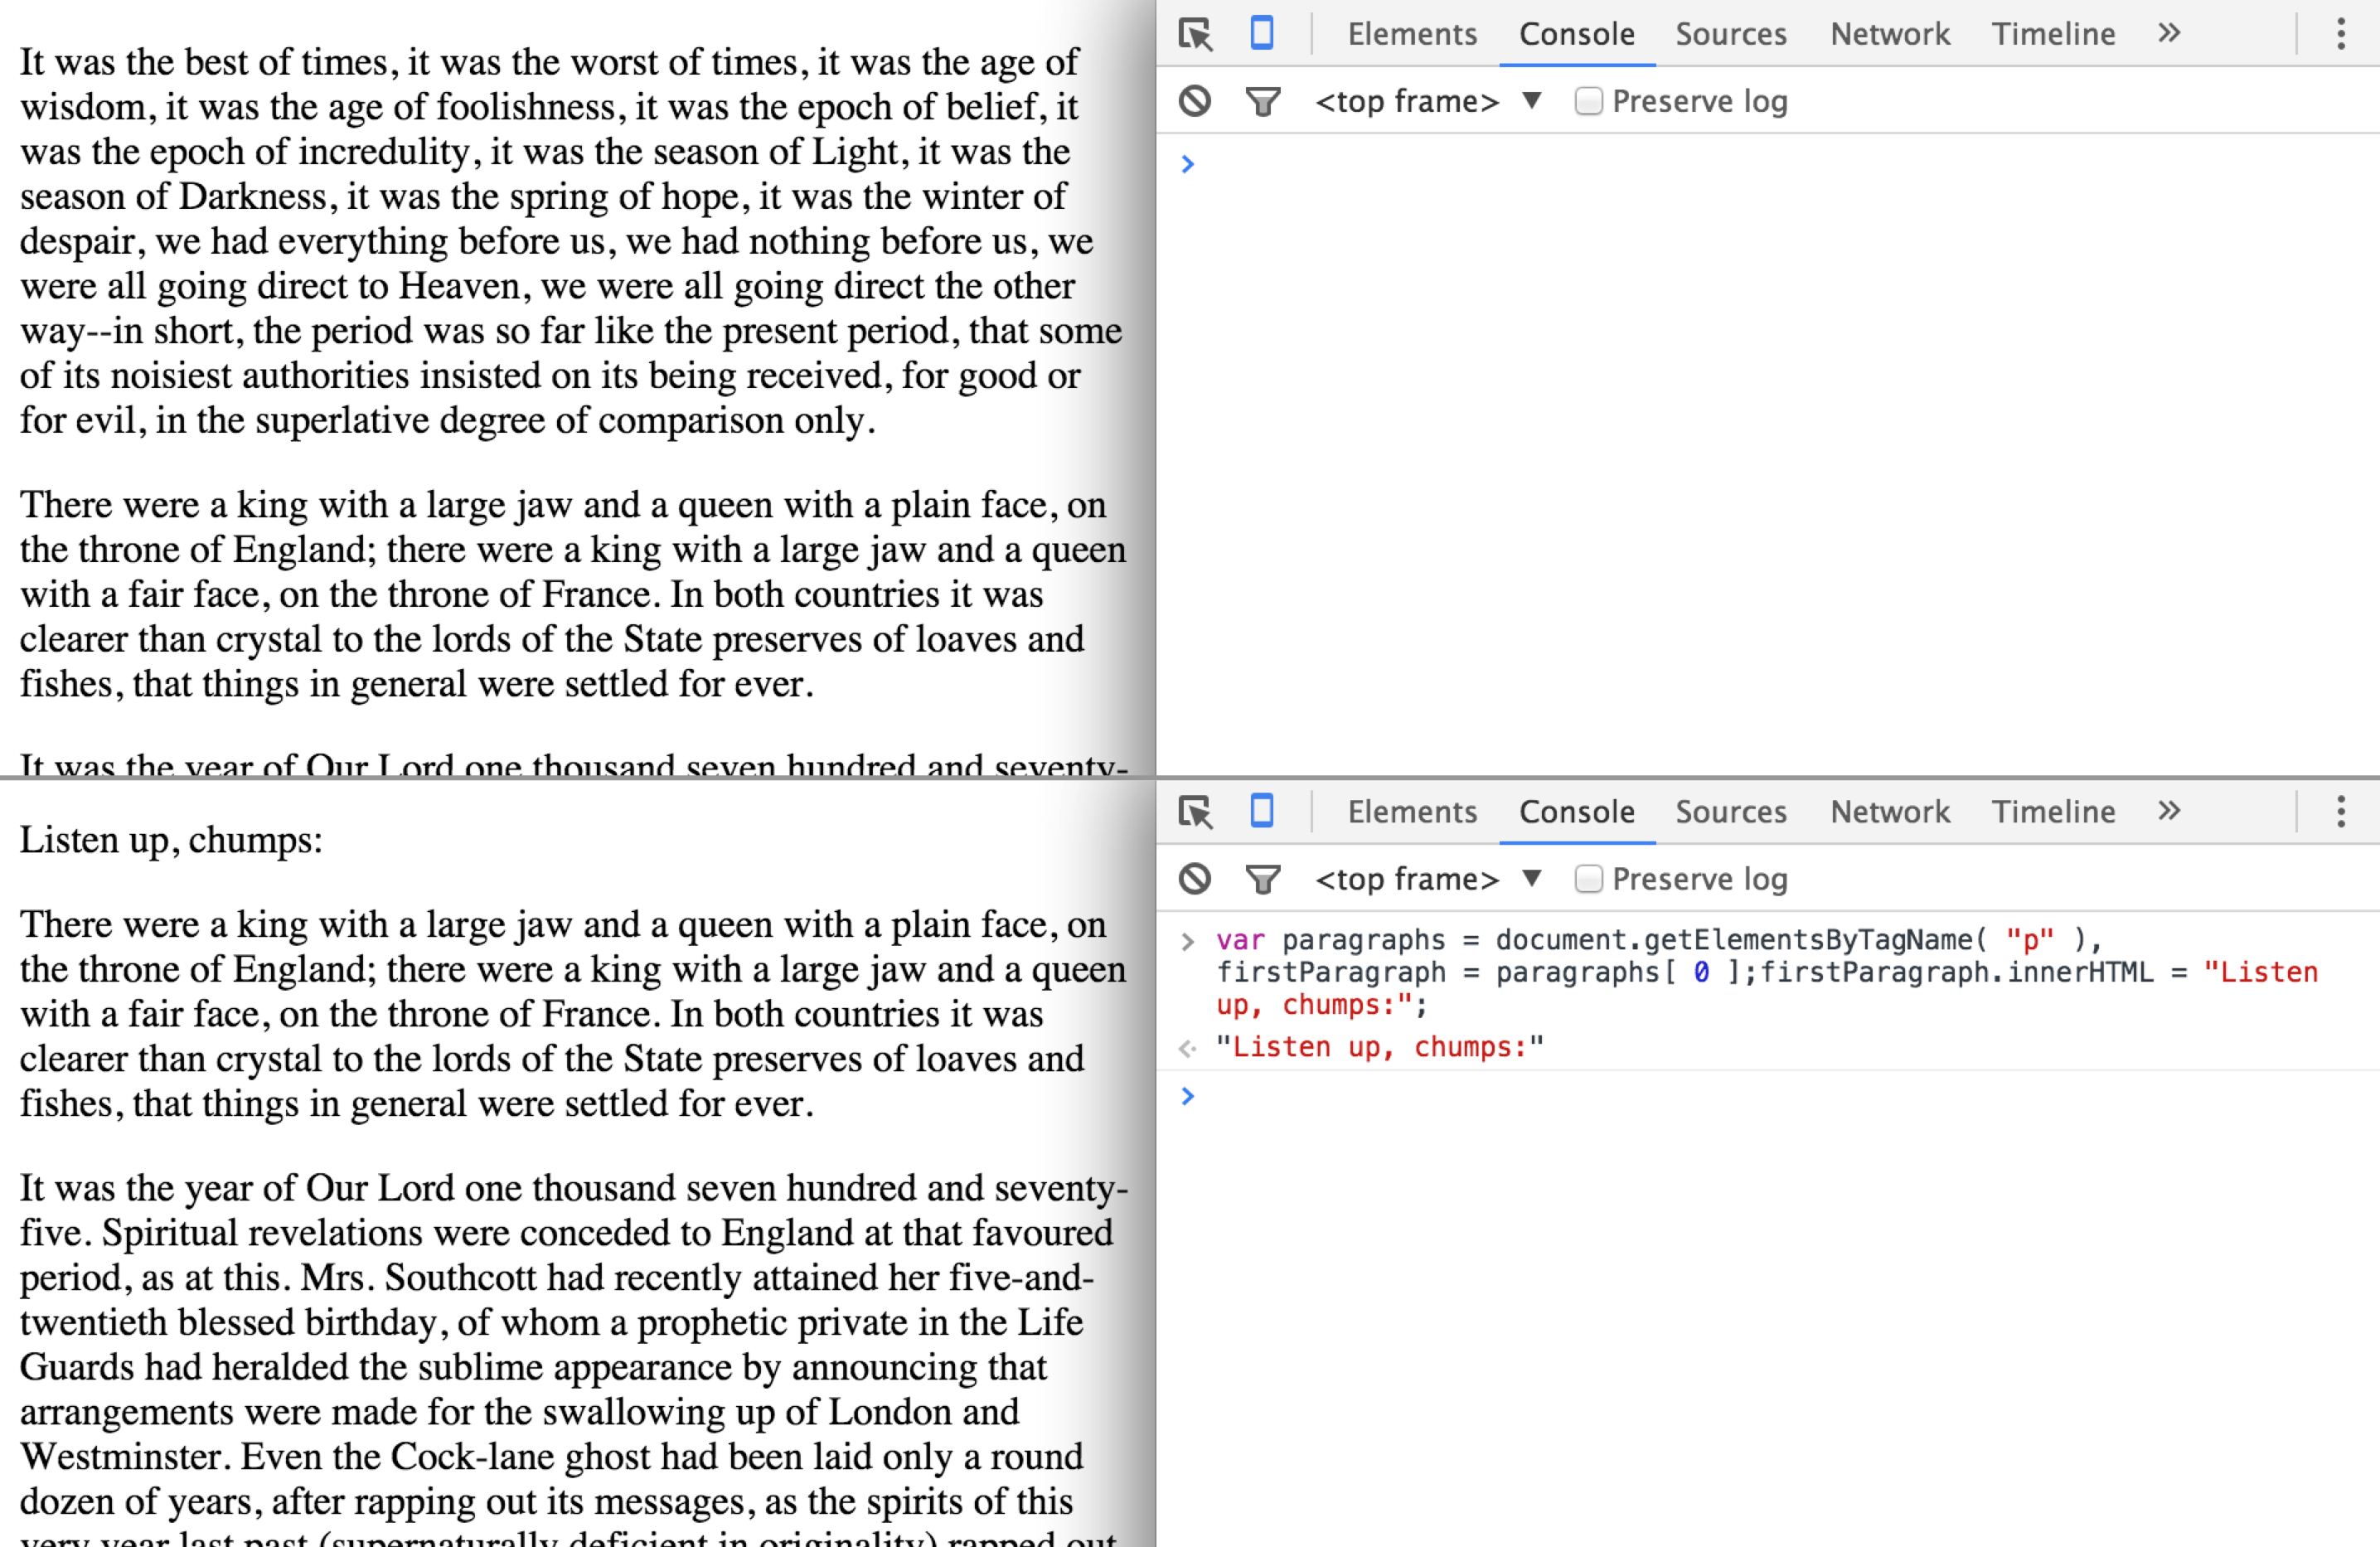 Screenshot of JavaScript console and rendered HTML page side-by-side,  showing markup being updated as changes in the DOM are being made.